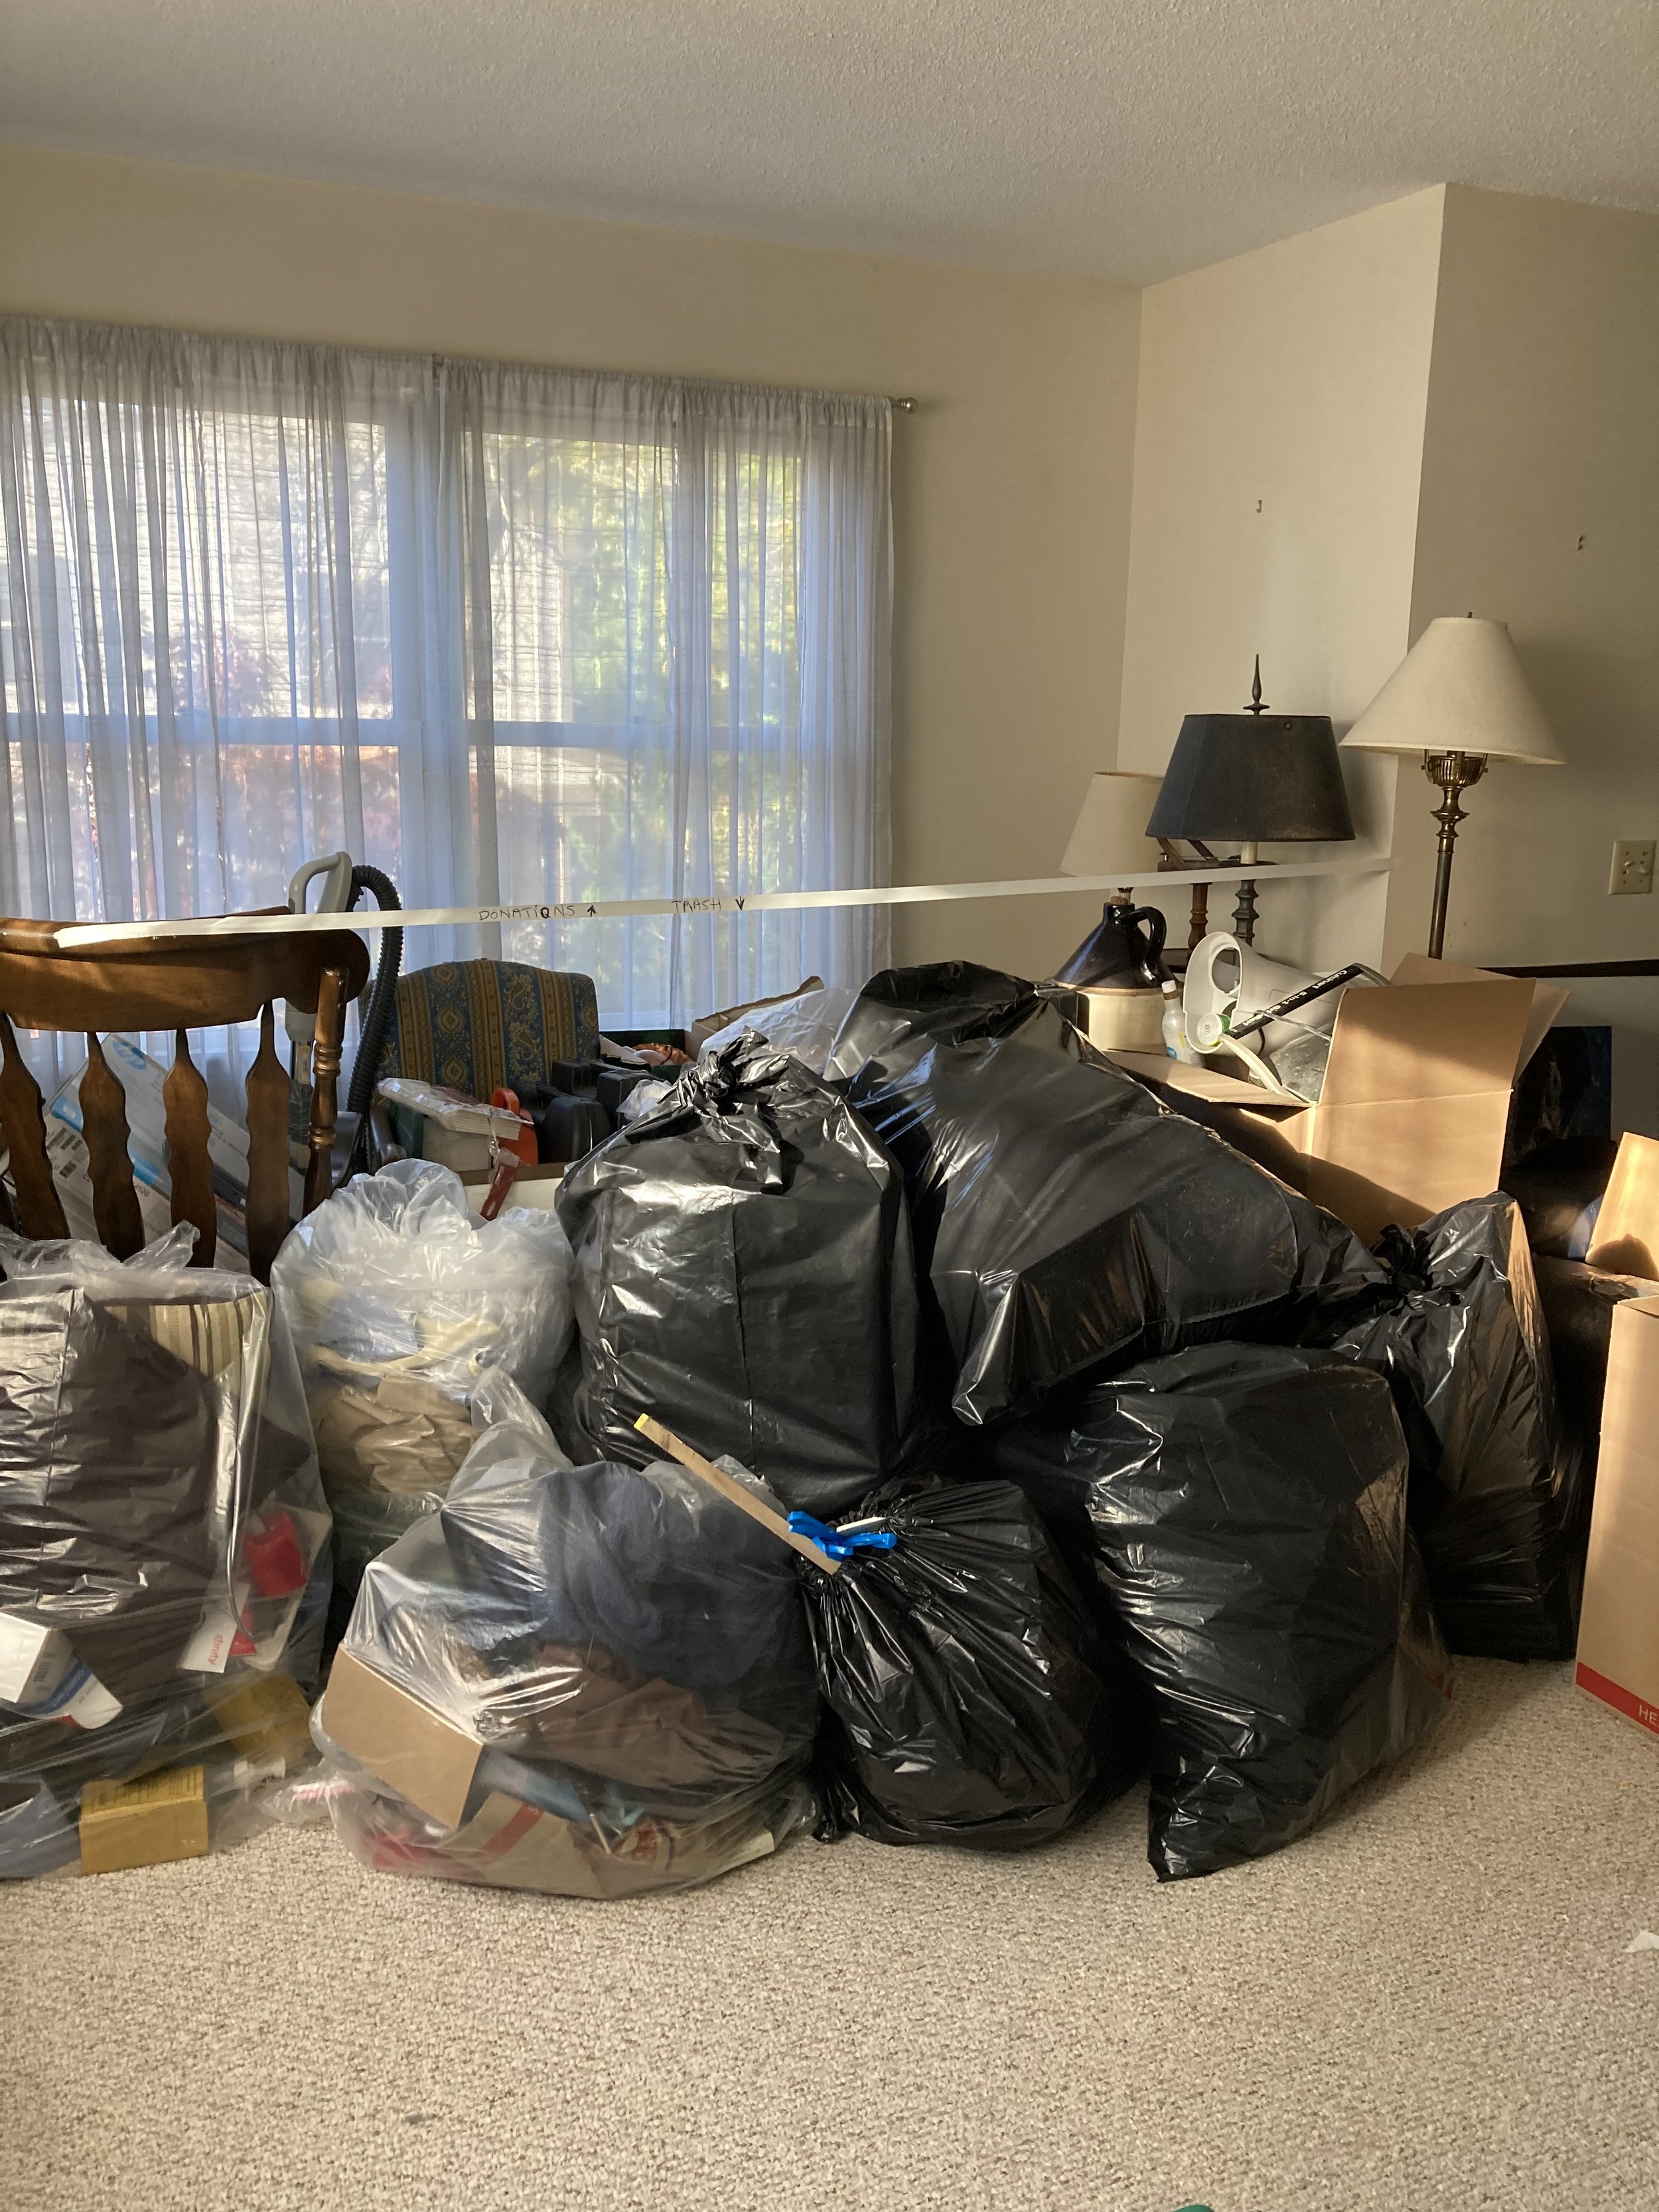 Living Room During the Sorting Process